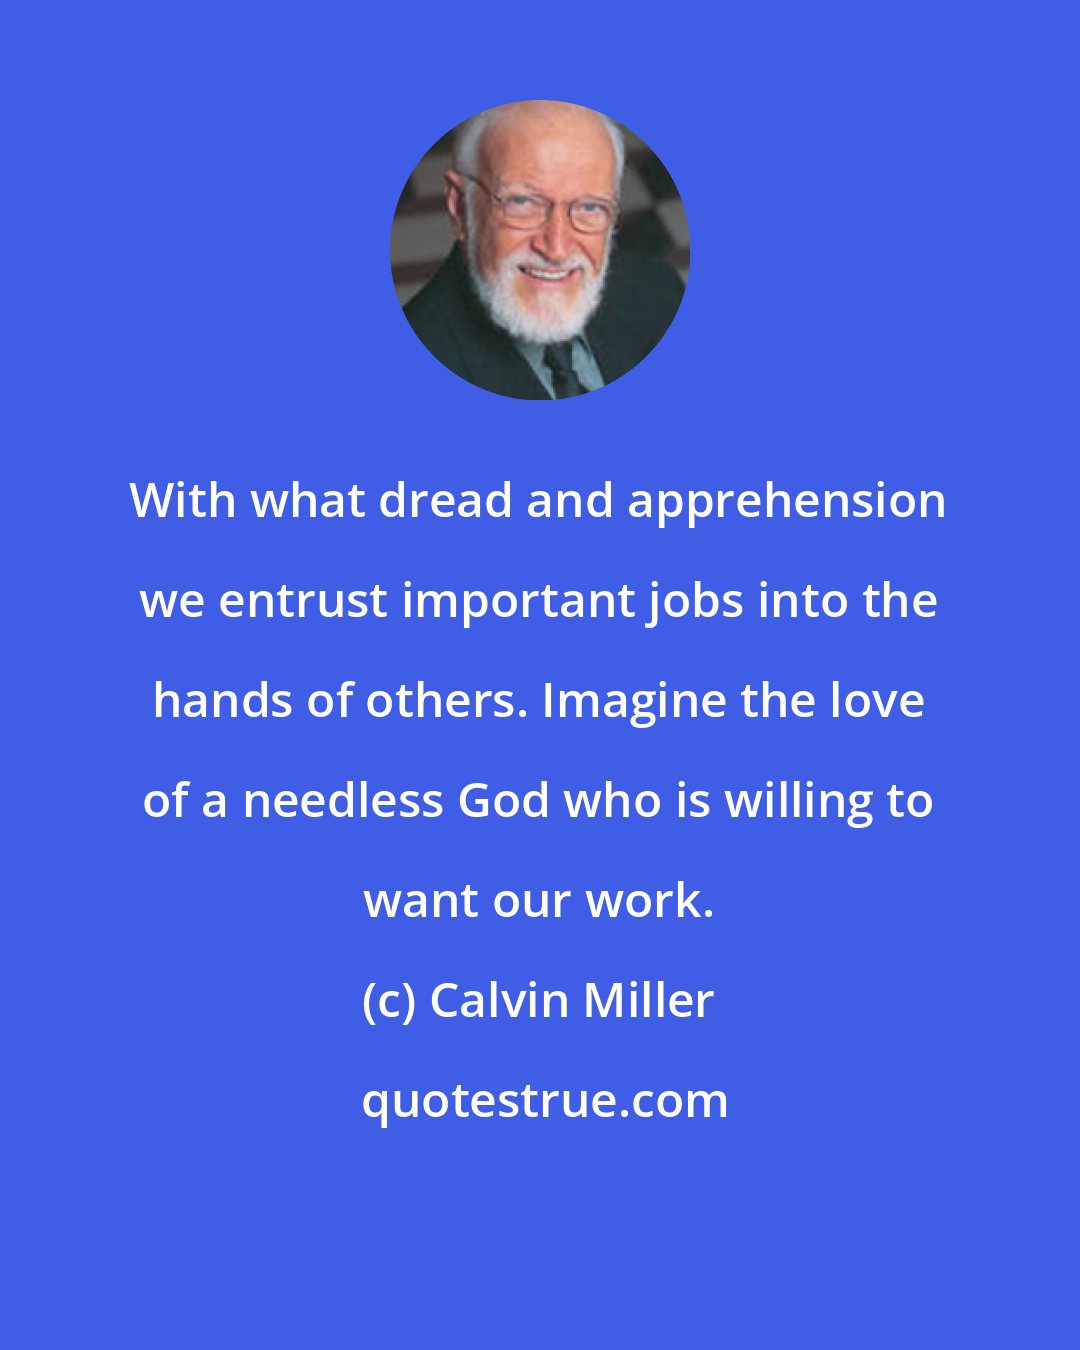 Calvin Miller: With what dread and apprehension we entrust important jobs into the hands of others. Imagine the love of a needless God who is willing to want our work.